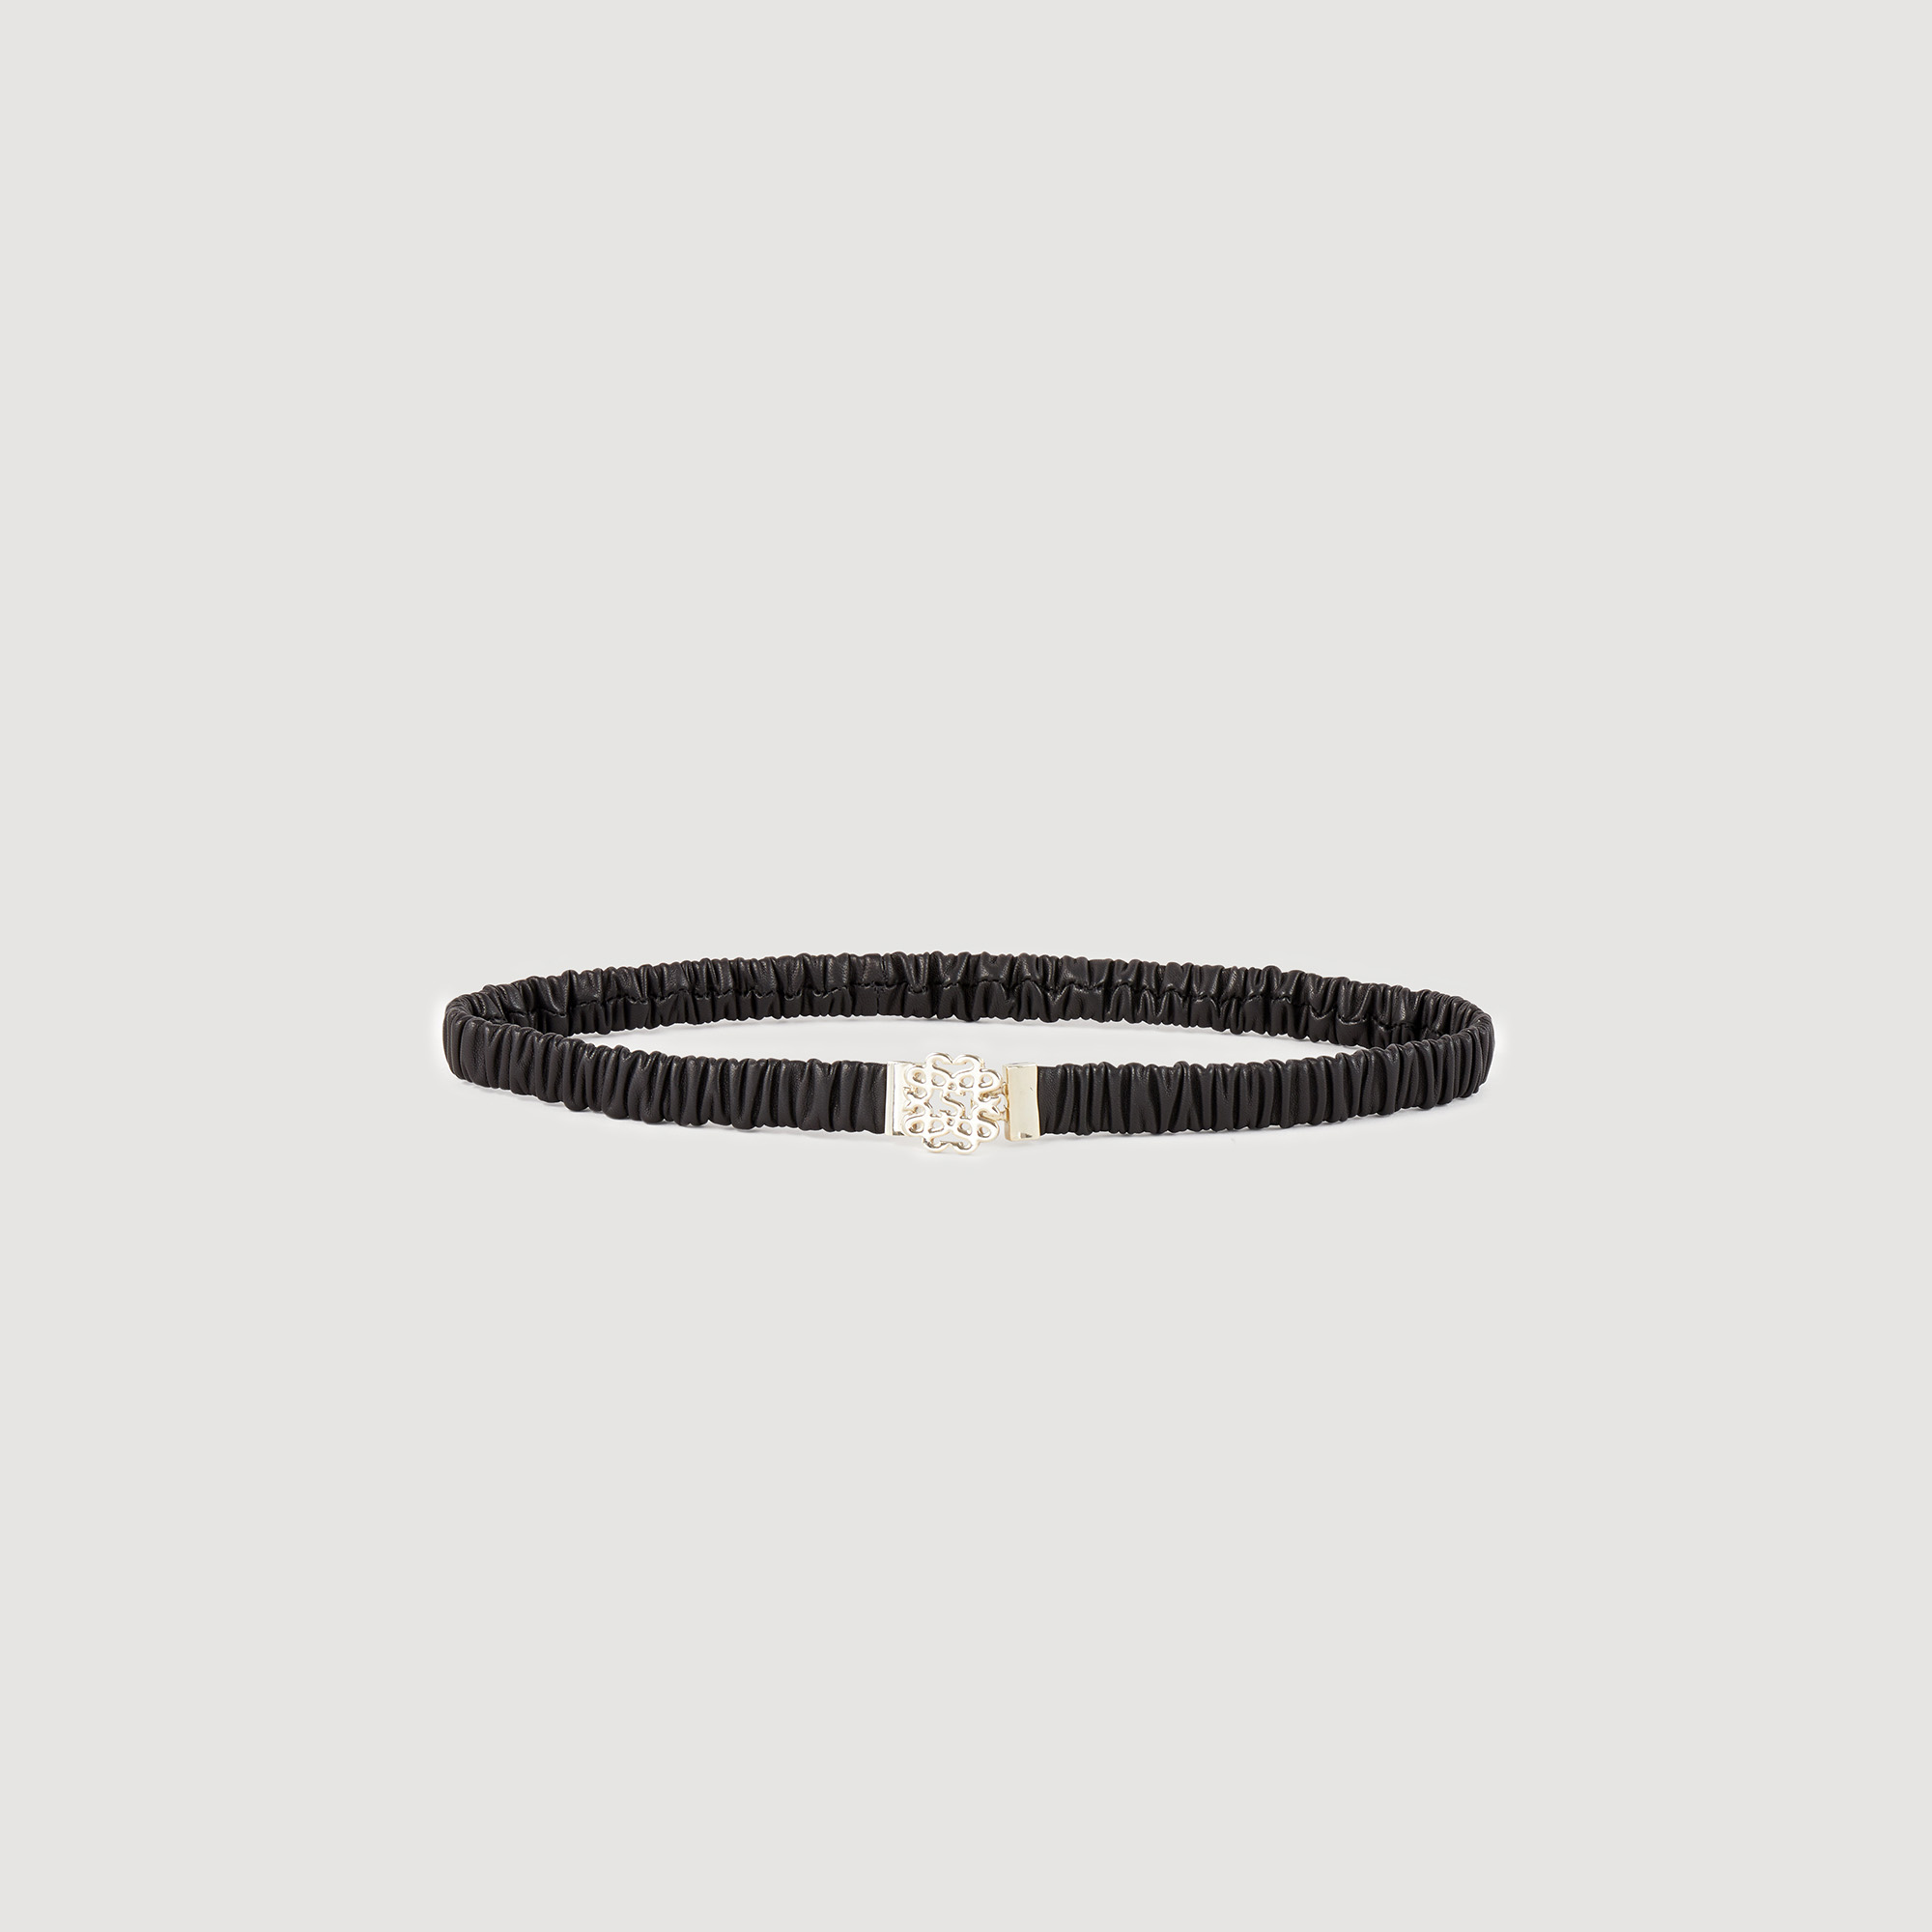 Sandro polyester Leather: Gathered elasticated leather belt with a double S logo buckle